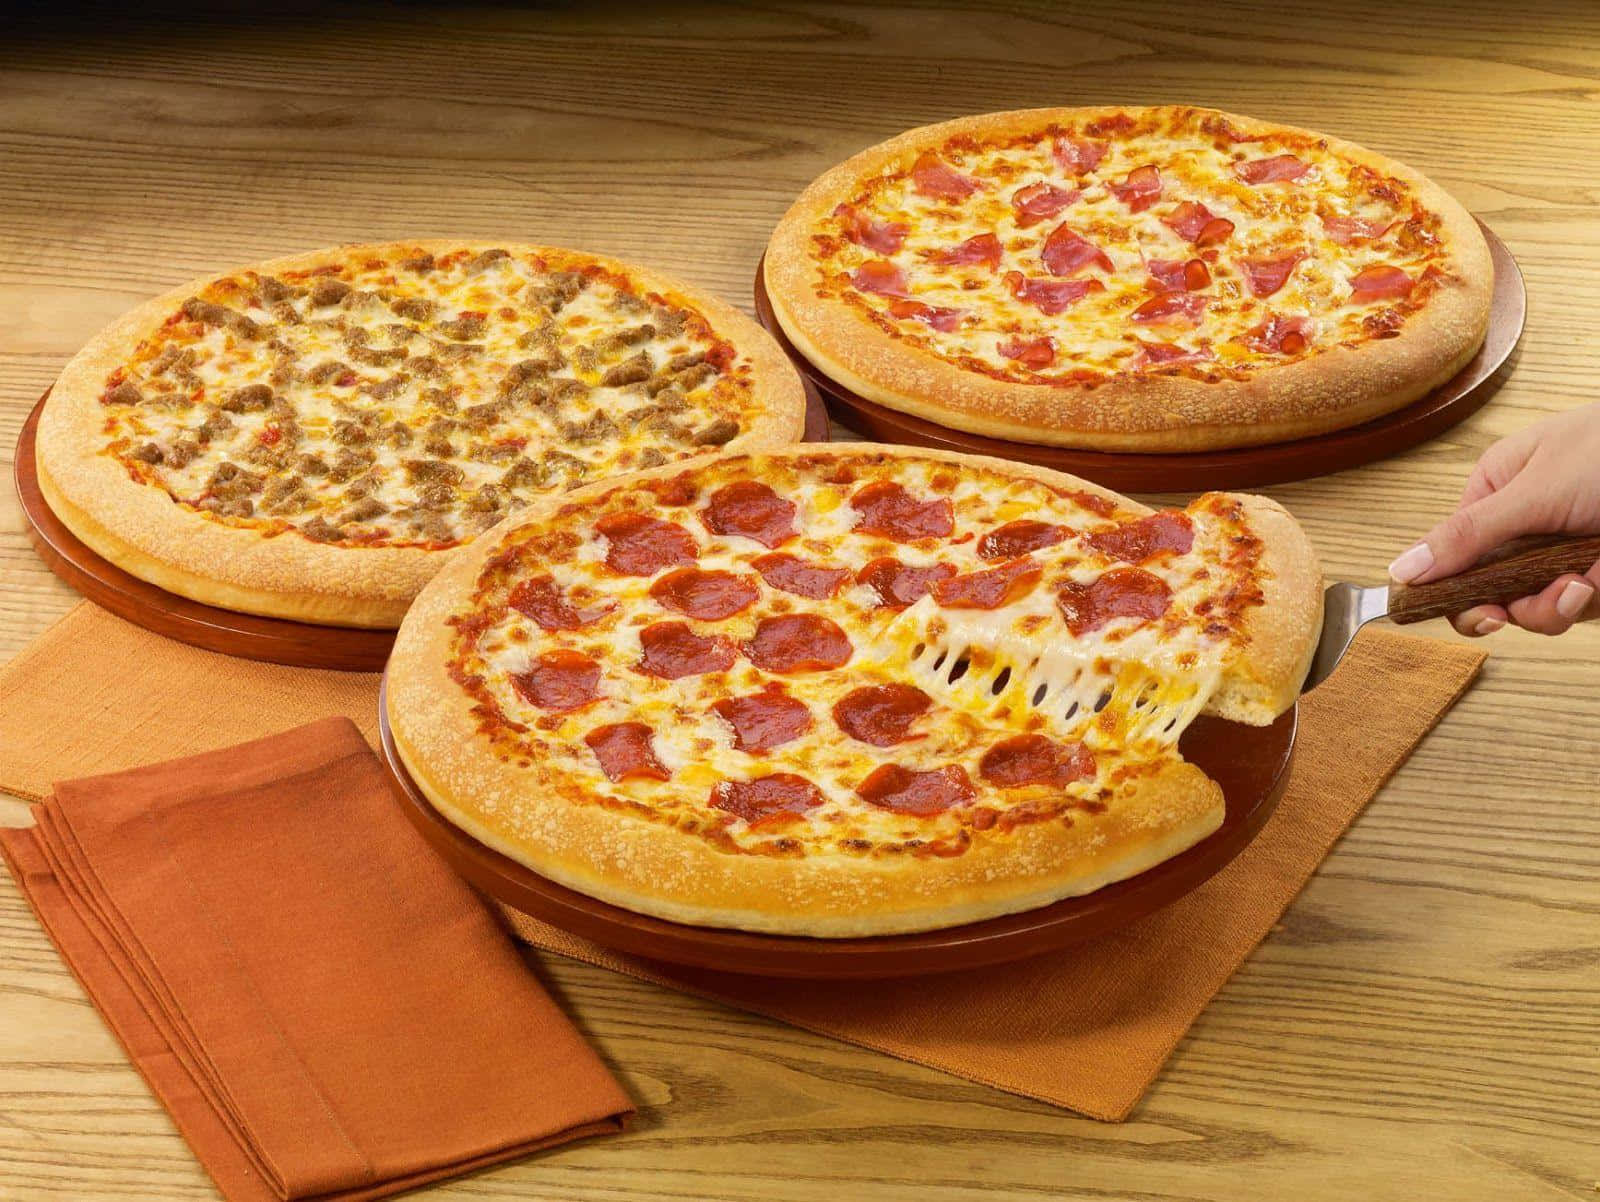 Got a craving for Pizza Hut?